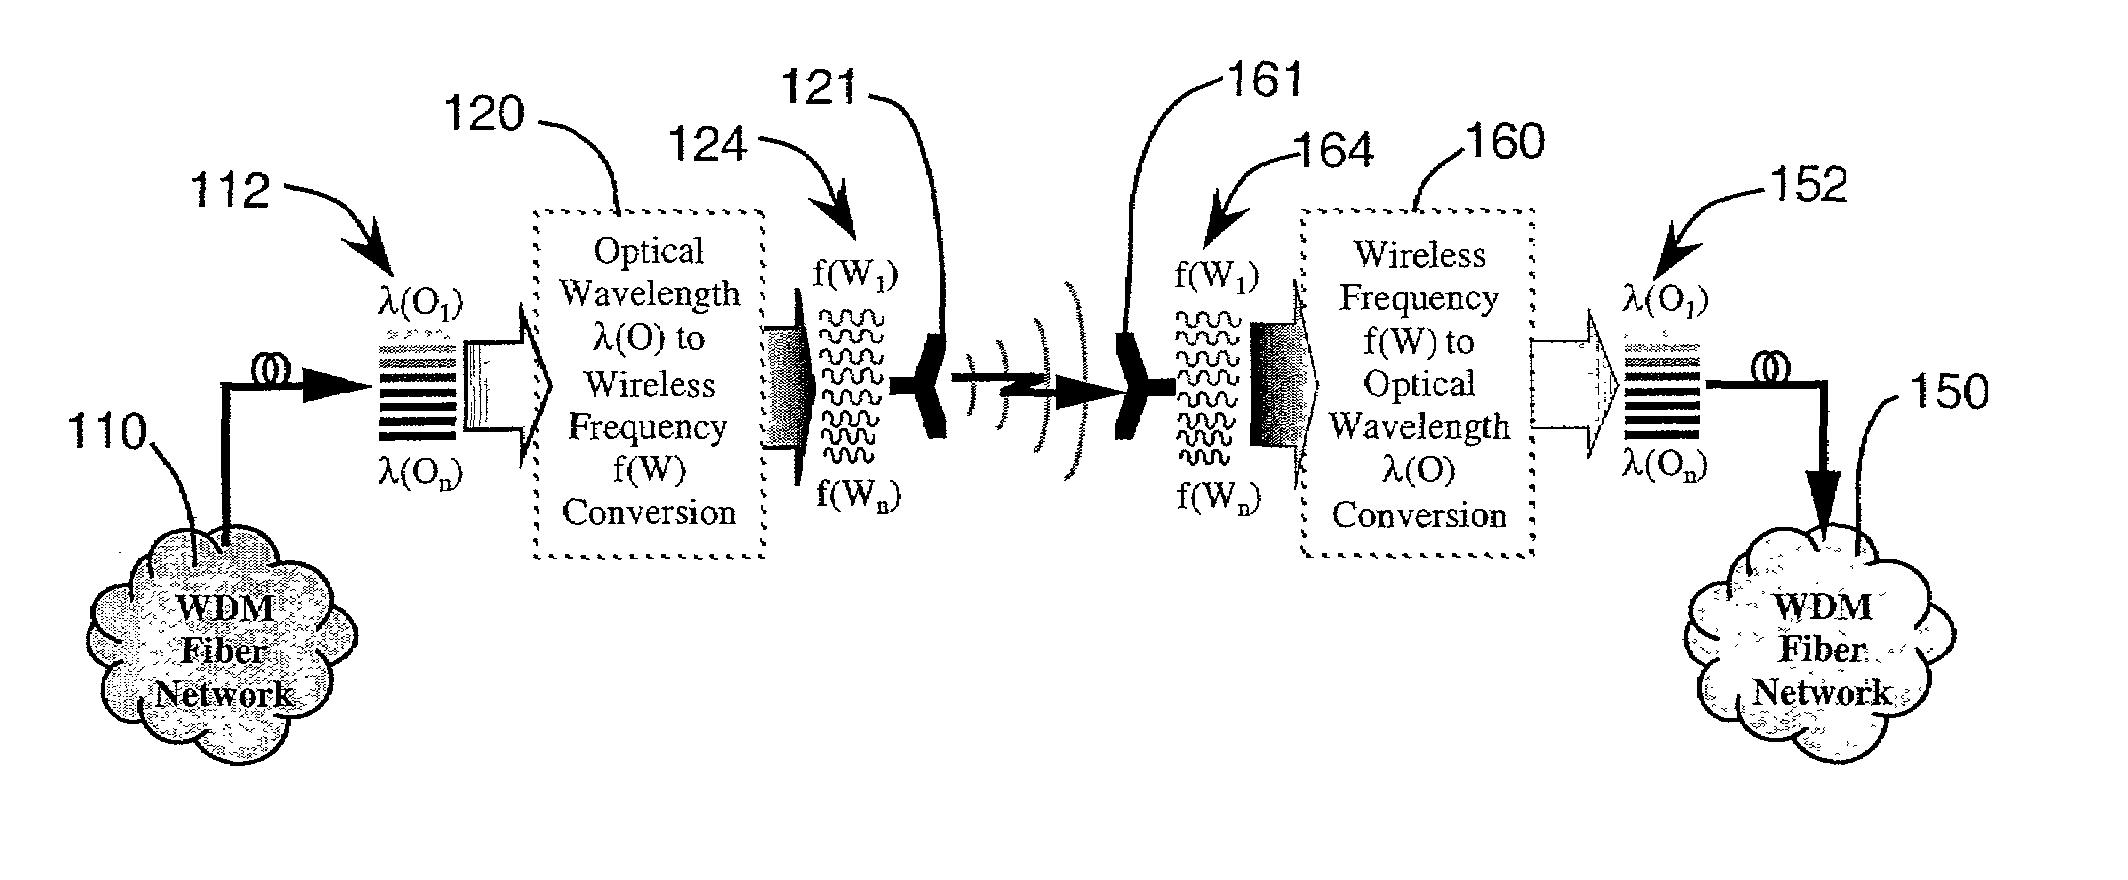 Wireless wavelength division multiplexed system